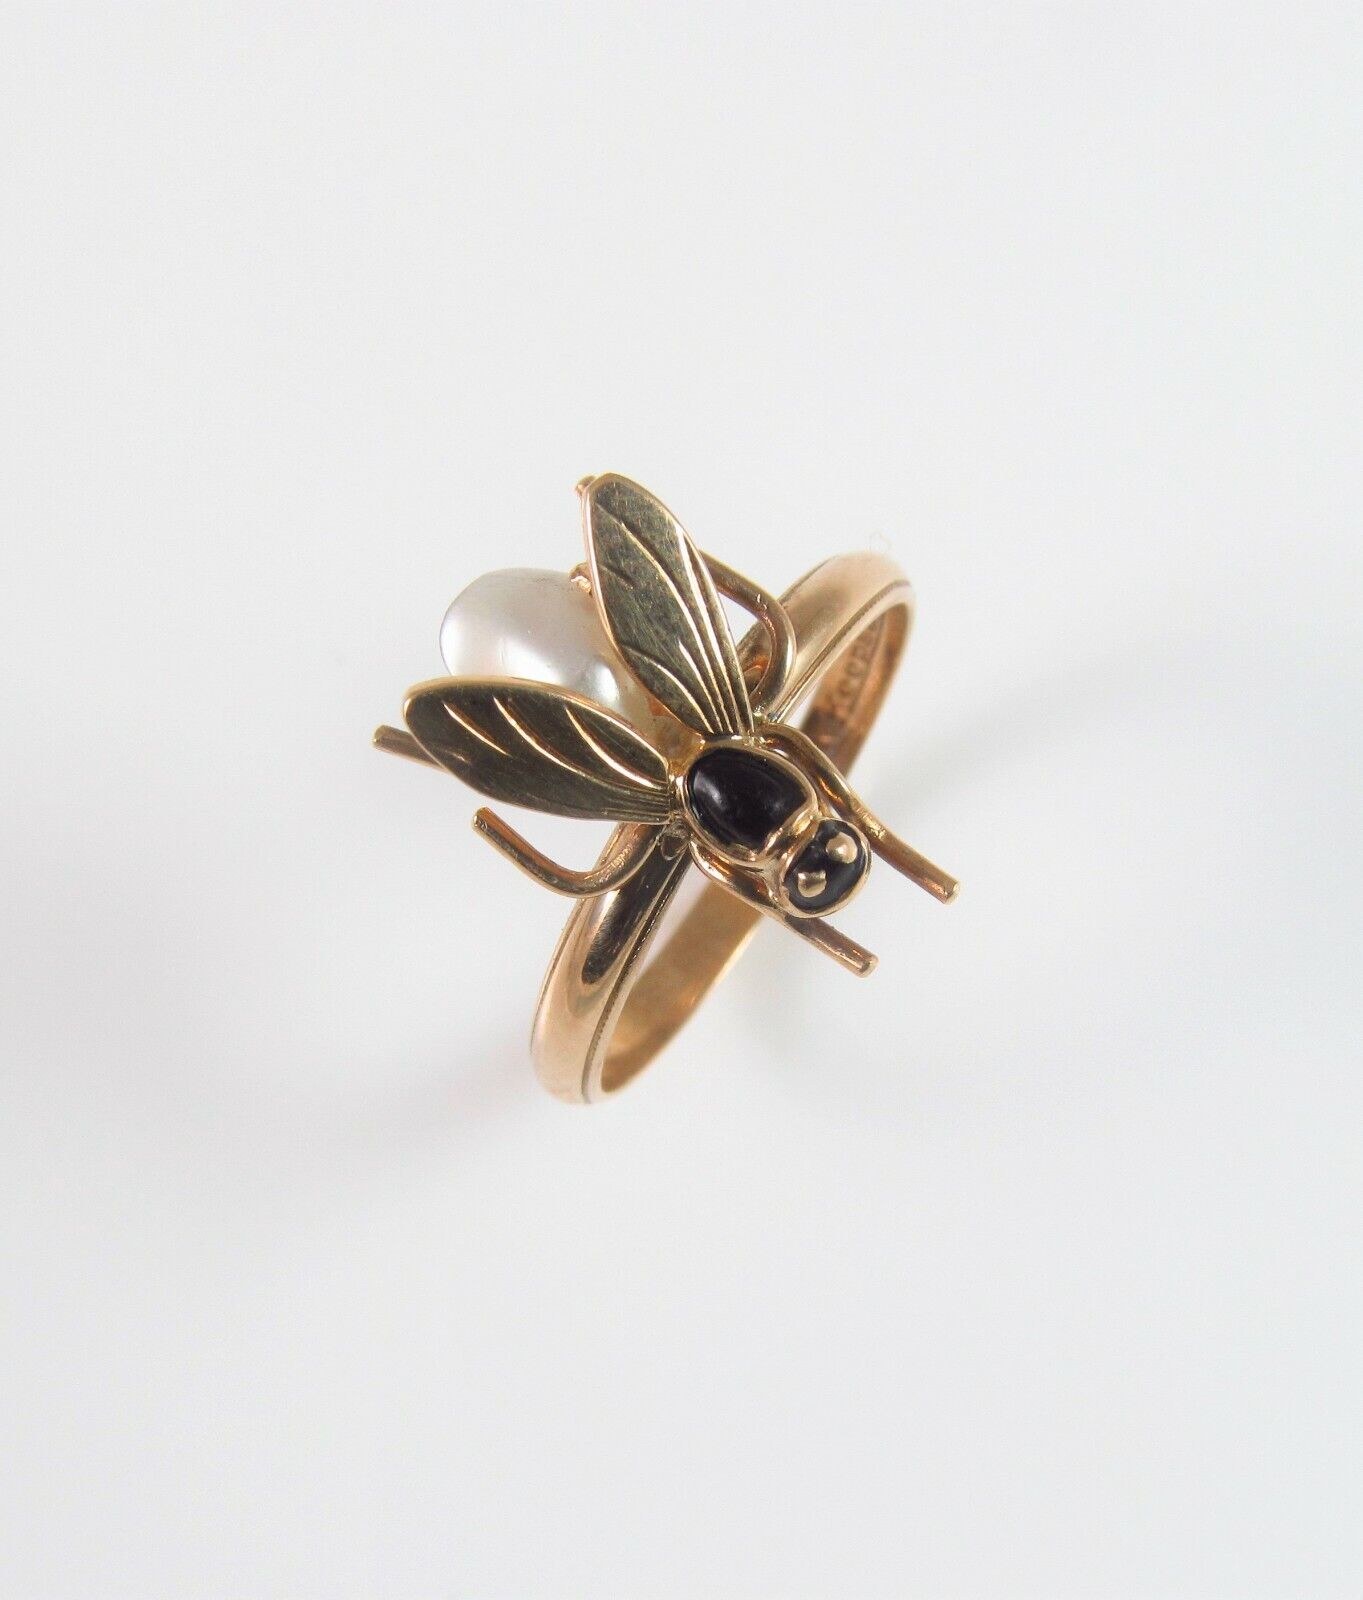 Vintage 14k Gold Enamel Pearl Body Insect Wasp Bee Fly Conversion Ring Size 6.5